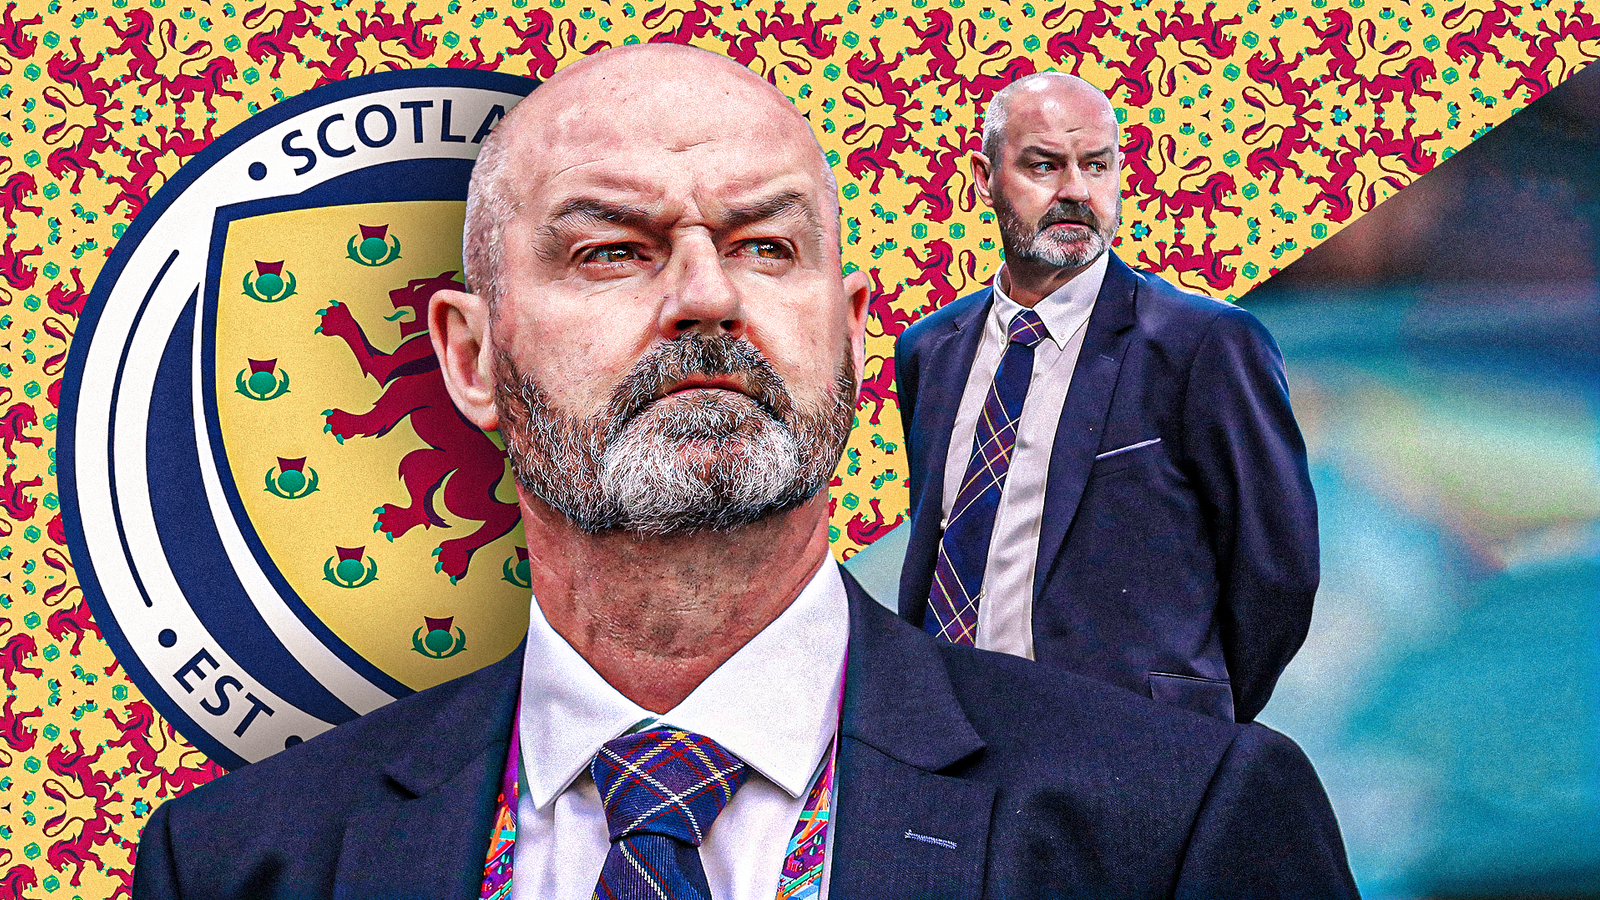 Scotland’s road to the FIFA World Cup play-offs